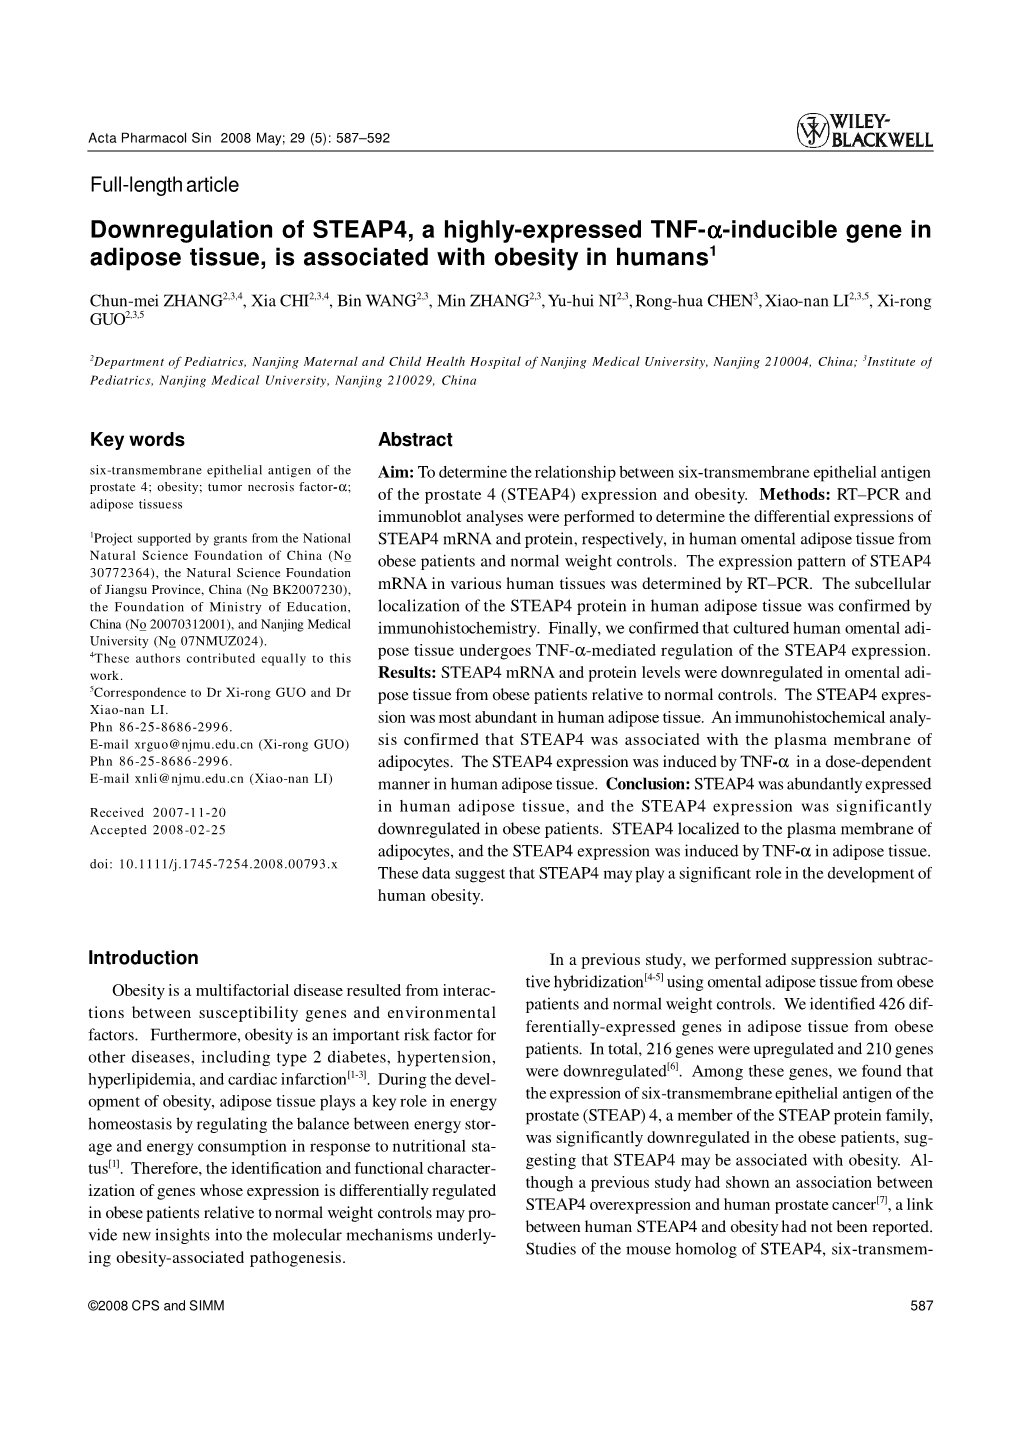 Downregulation of STEAP4, a Highly-Expressed TNF-A-Inducible